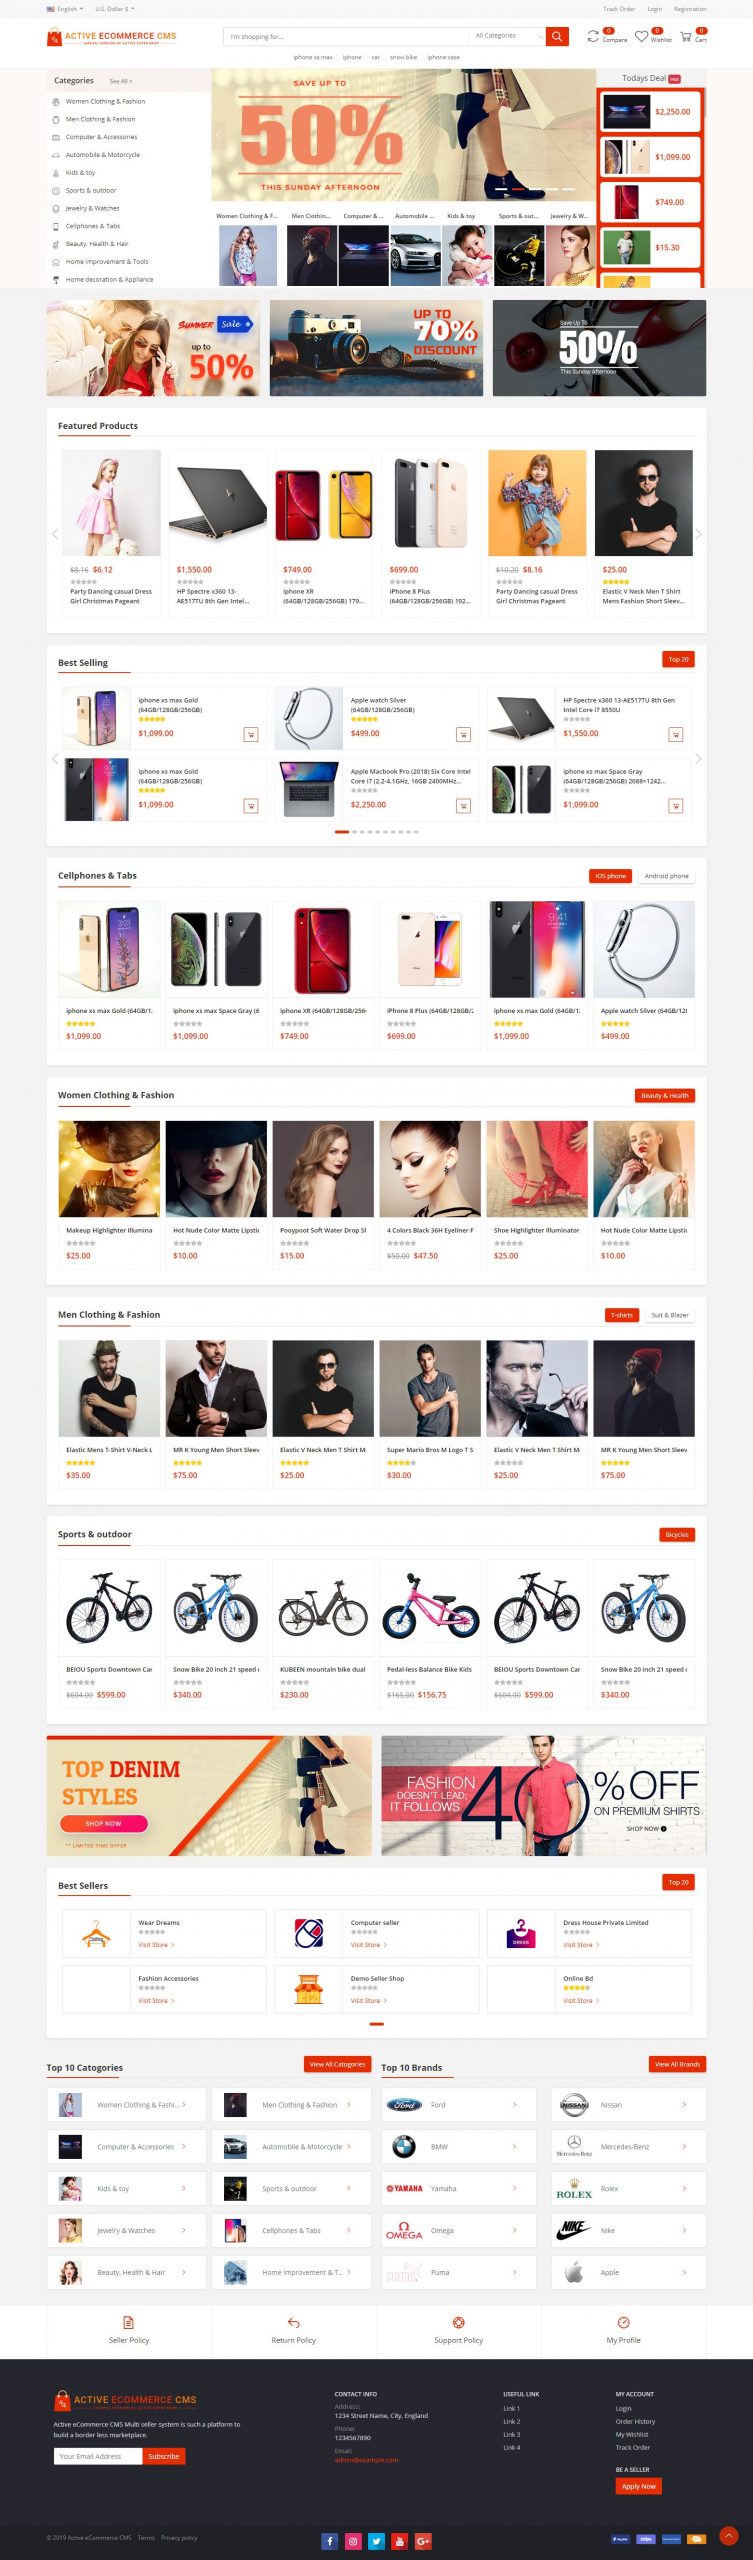 56302Active eCommerce CMS + add-on + apss code